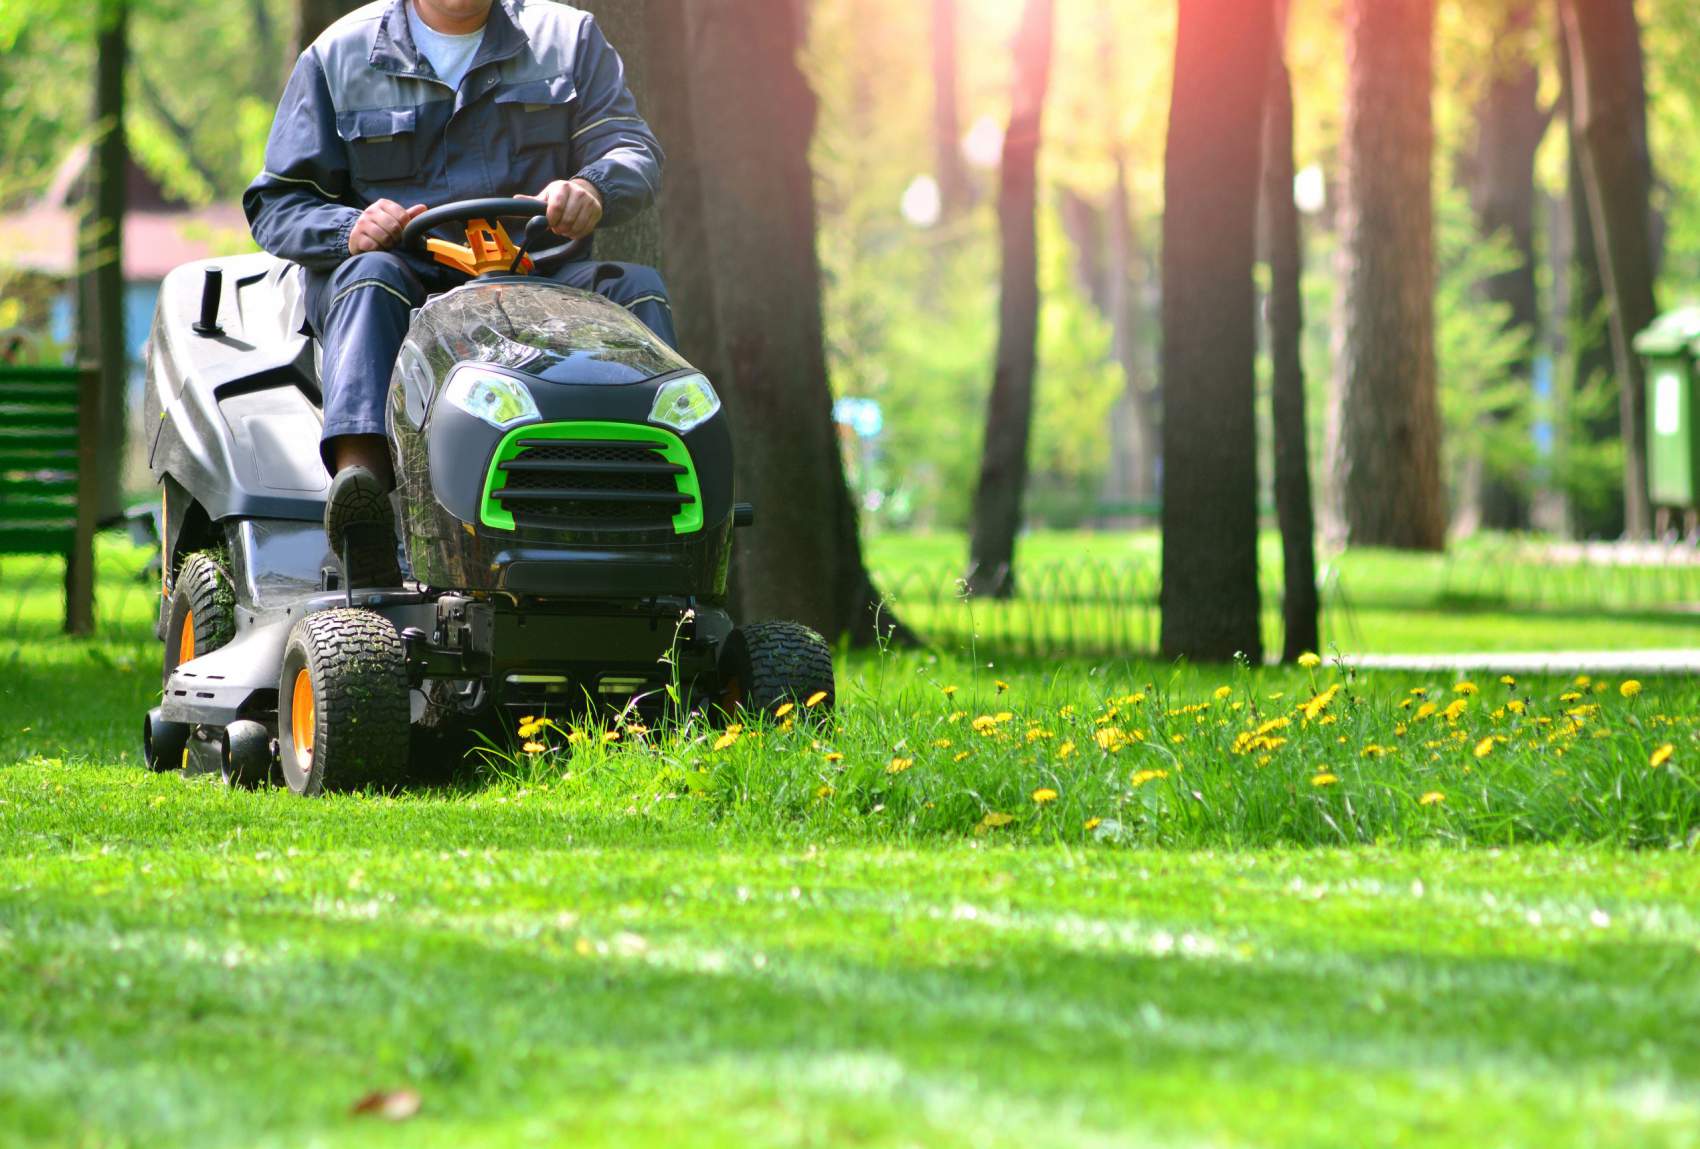 Lawn Care Services Denver CO Mowing Trimming Aeration More